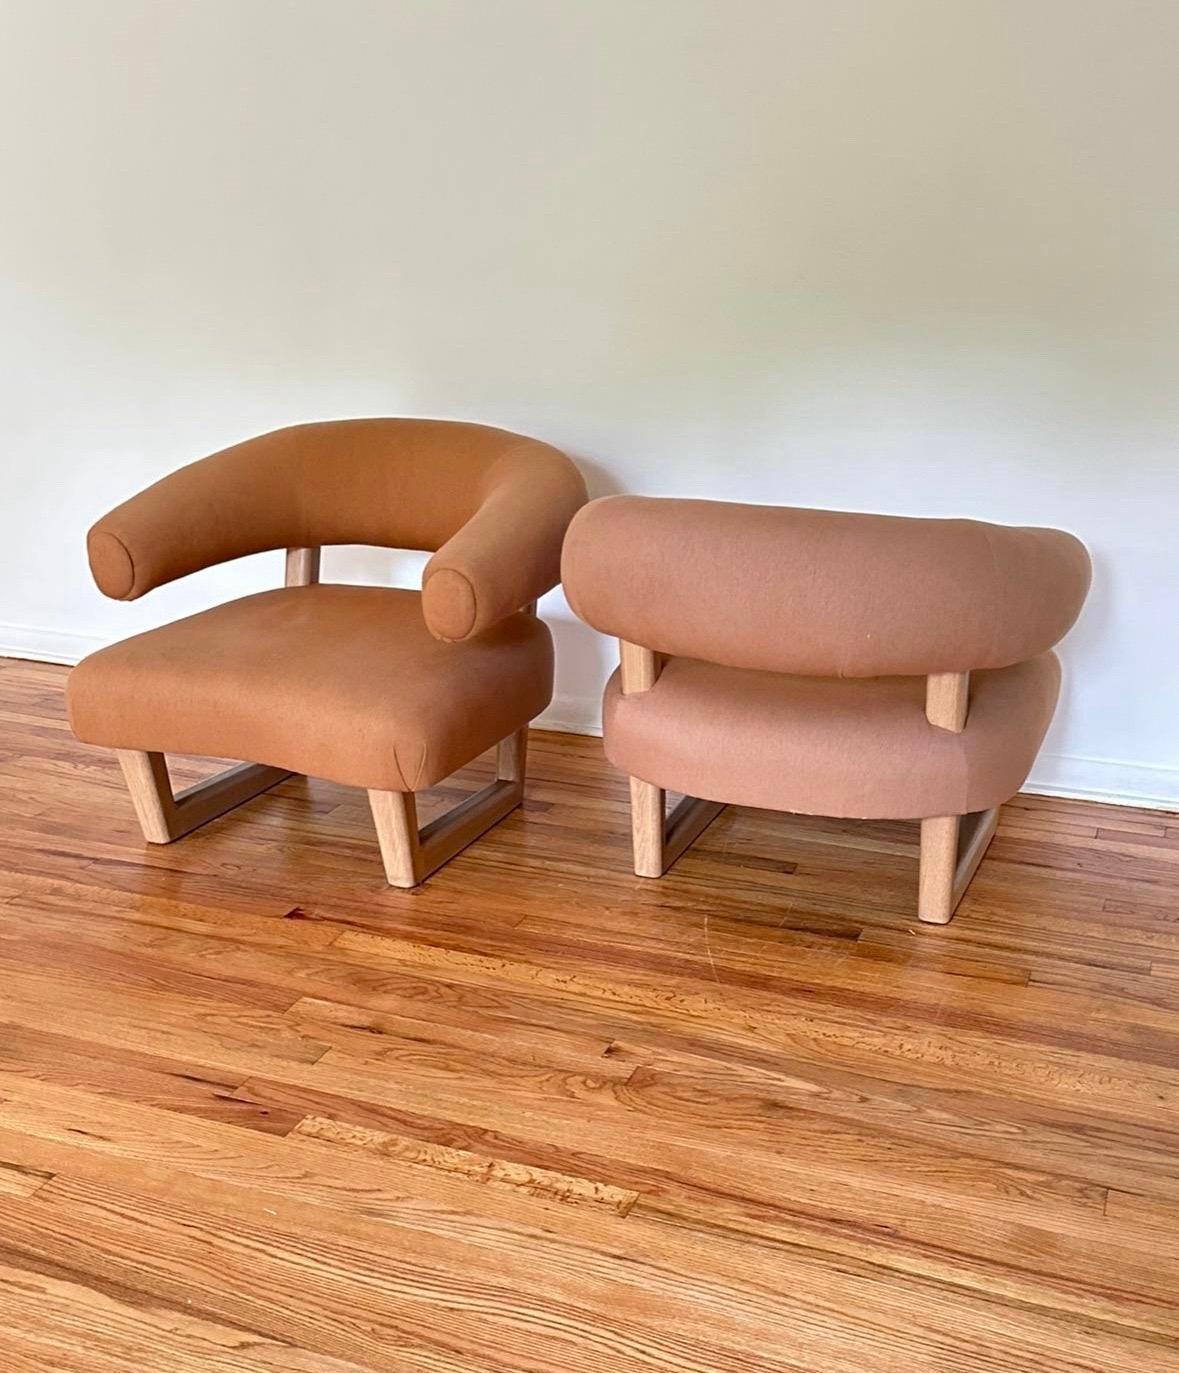 Italian Pair of Armchairs by Peter Marino for the Getty Nyc French modernist organic 